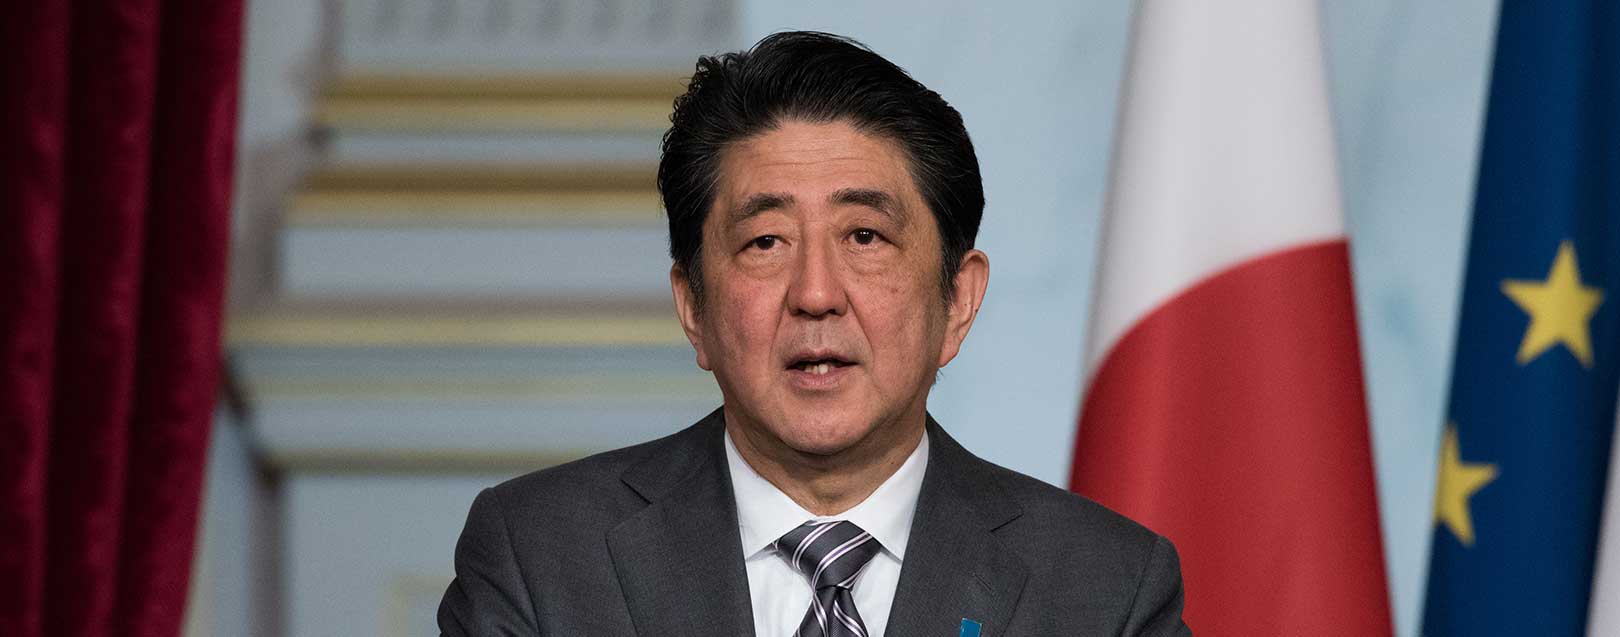 TPP trade pact meaningless without US: Japan